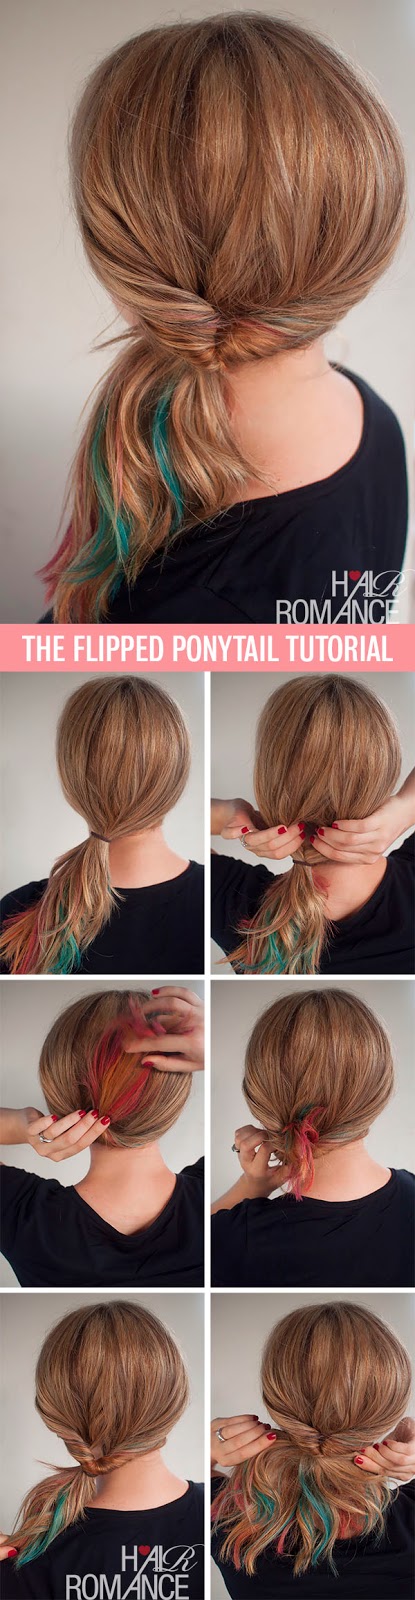 Beauty Land: 5 Quick and Easy Hairstyles!